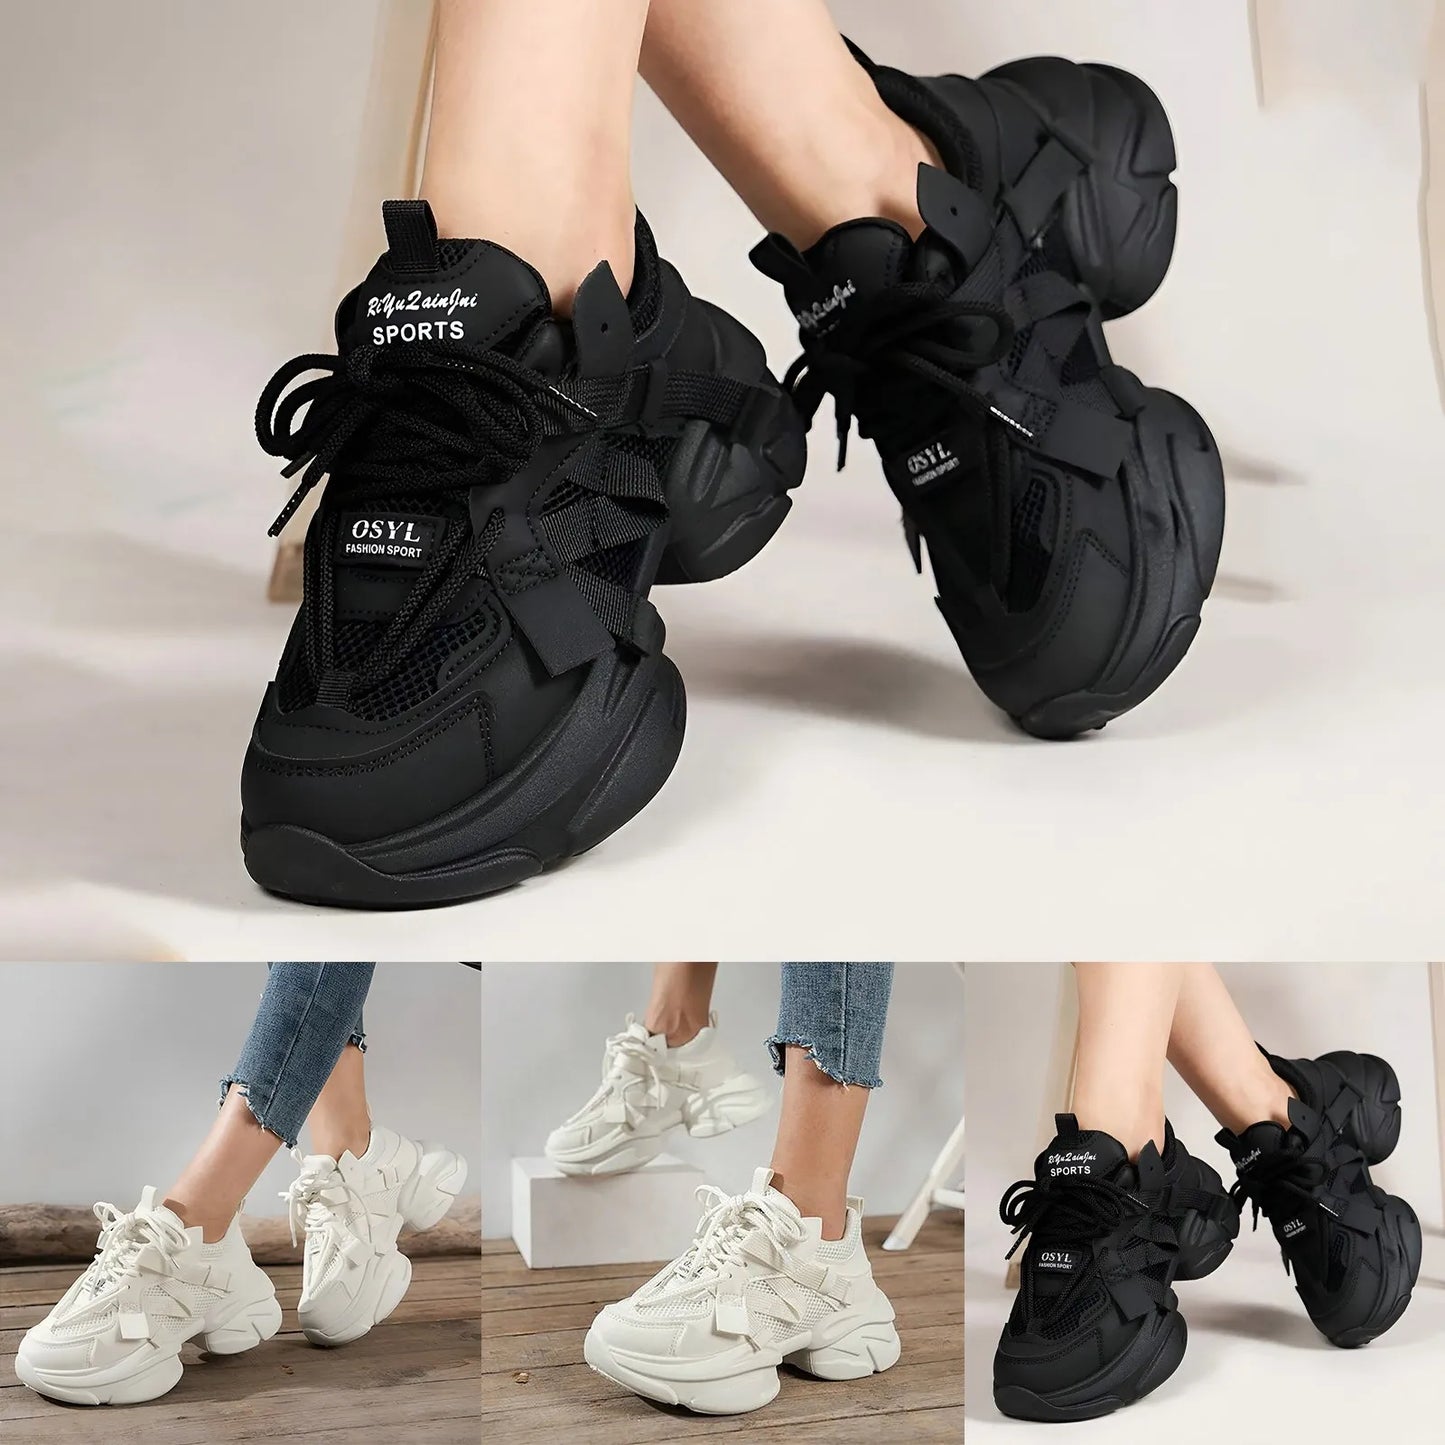 Leisure Sport Shoes Running Thick Sole Platform Sneakers/Breathable Fashion Vulcanize Shoes